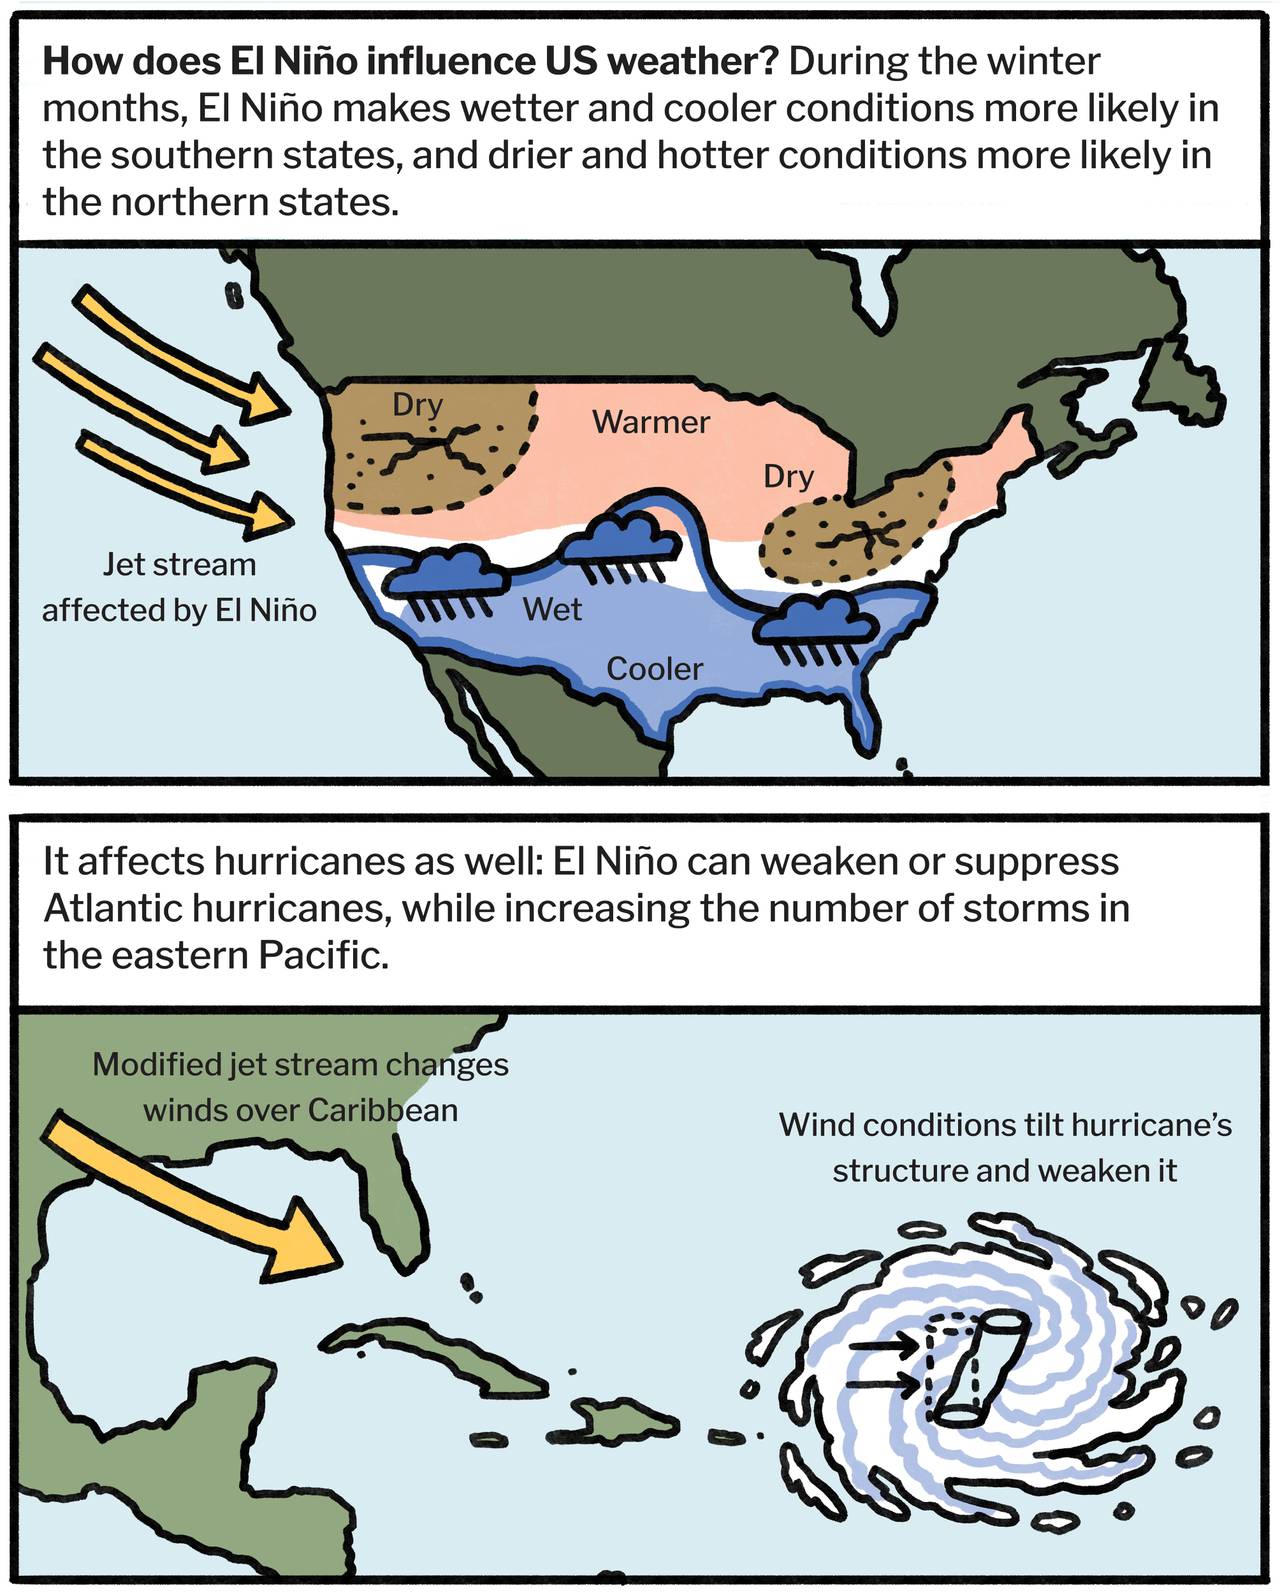 How does El Niño influence U.S. weather? During the winter months, El Niño makes wetter and cooler conditions more likely in the southern states, and drier and hotter conditions more likely in the northern states. It affects hurricanes as well: El Niño can weaken or suppress Atlantic hurricanes, while increasing the number of storms in the eastern Pacific.